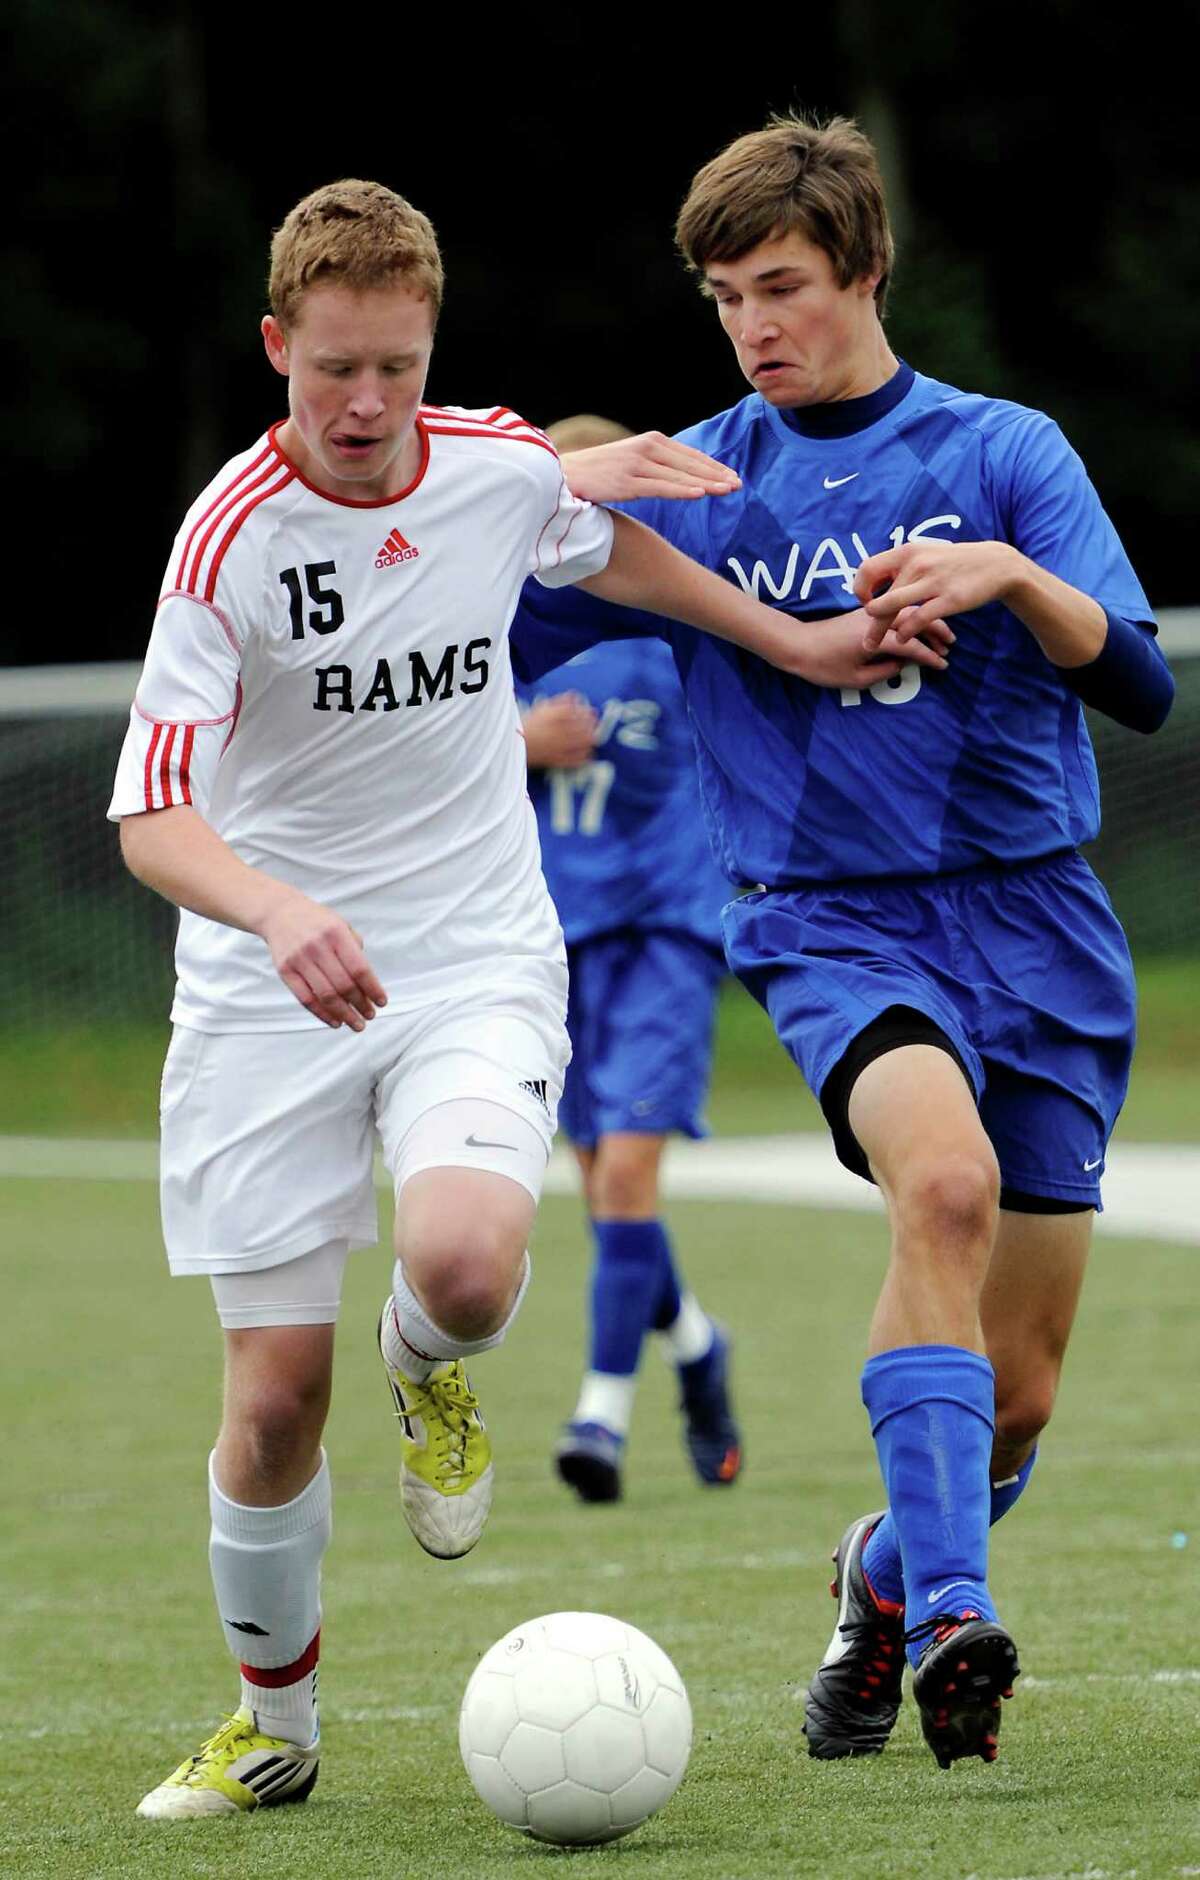 New Canaan high school's Alex Robey and Darien high school's Nick Vilter battle for the ball in a boys soccer game held at New Canaan high school, New Canaan, CT Monday October 8th, 2012.